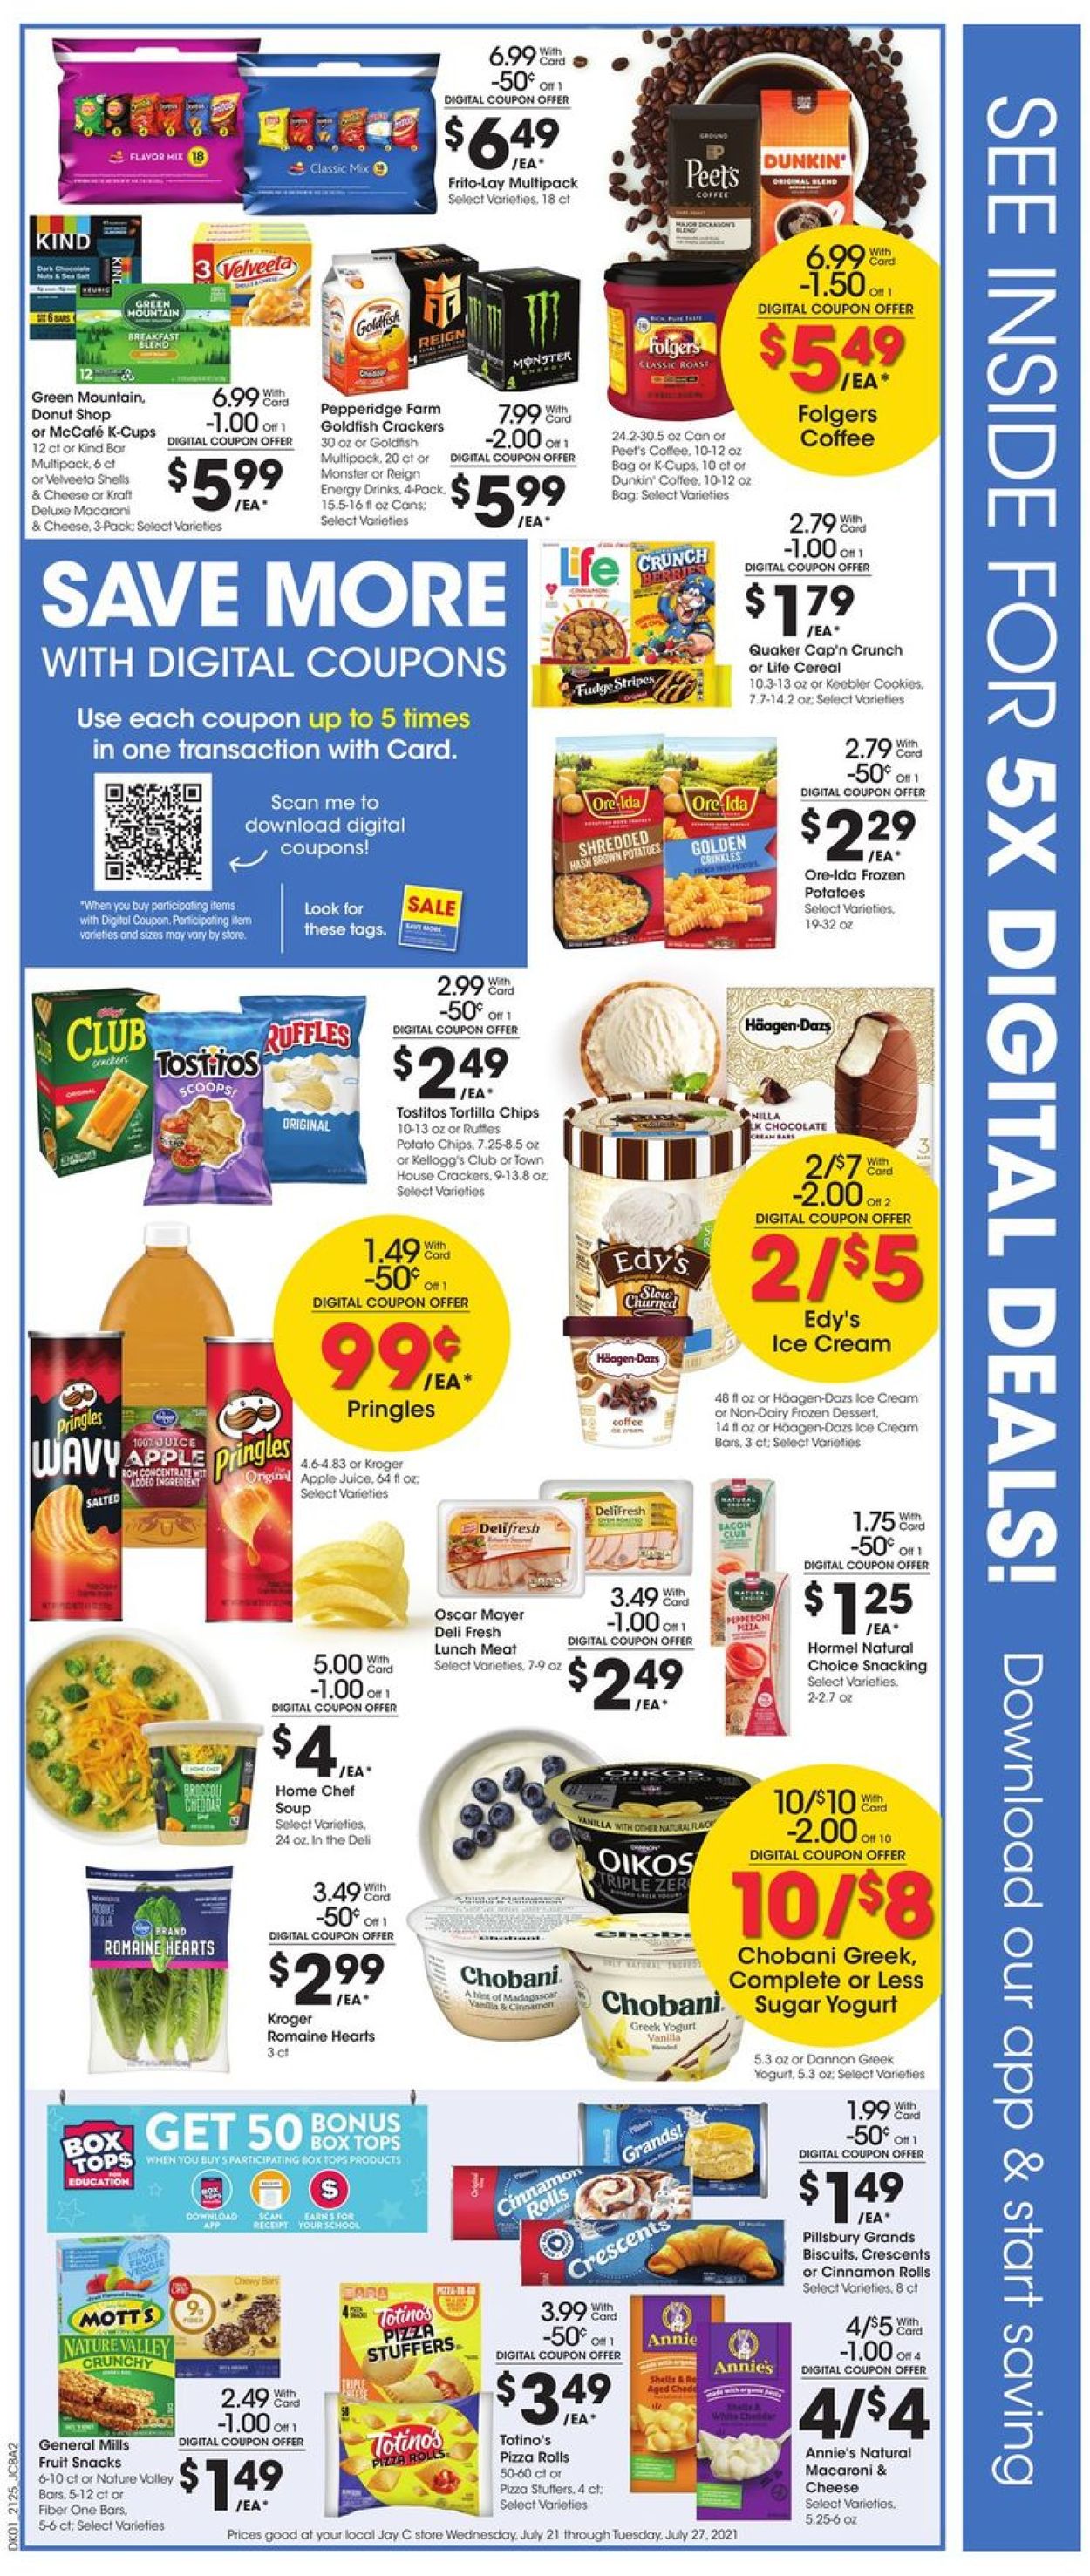 Catalogue Jay C Food Stores from 07/21/2021